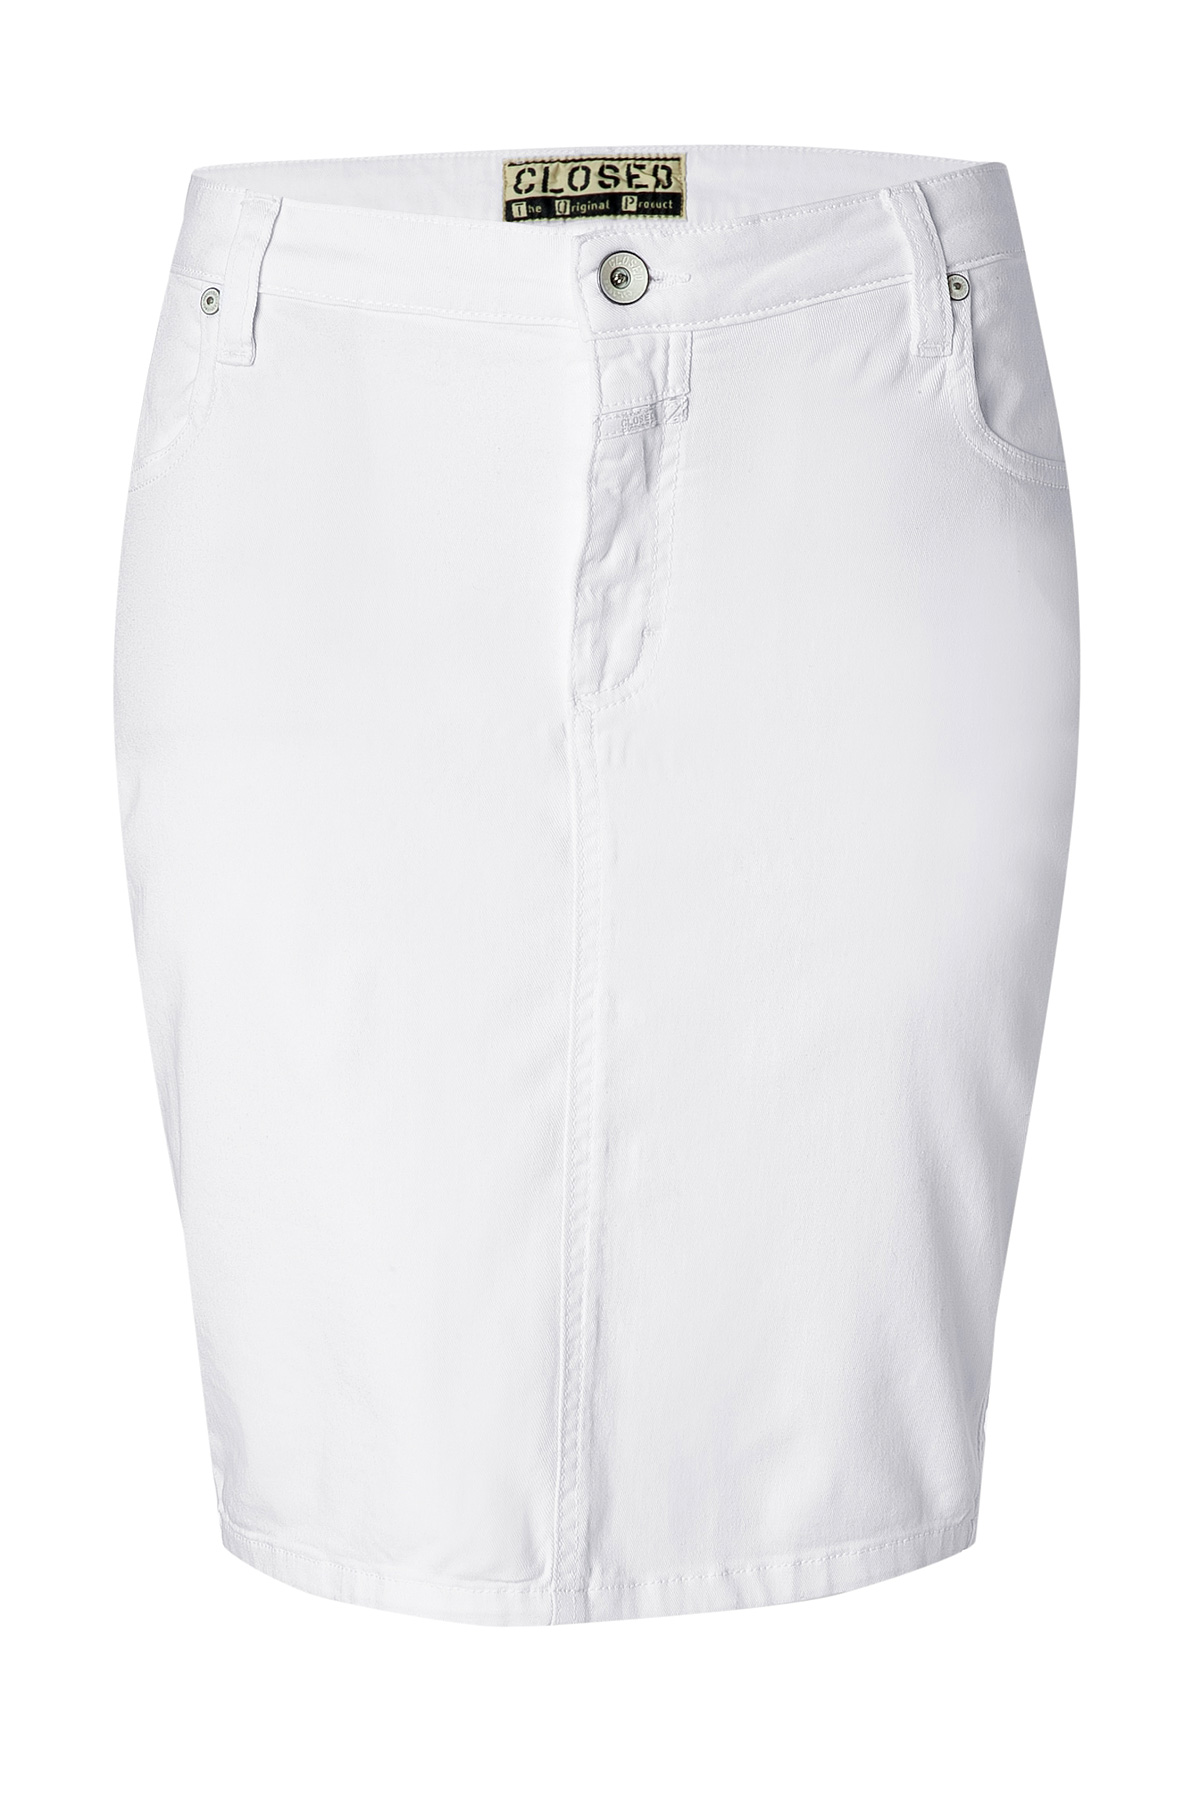 Lyst - Closed Cotton Austin Skirt in White